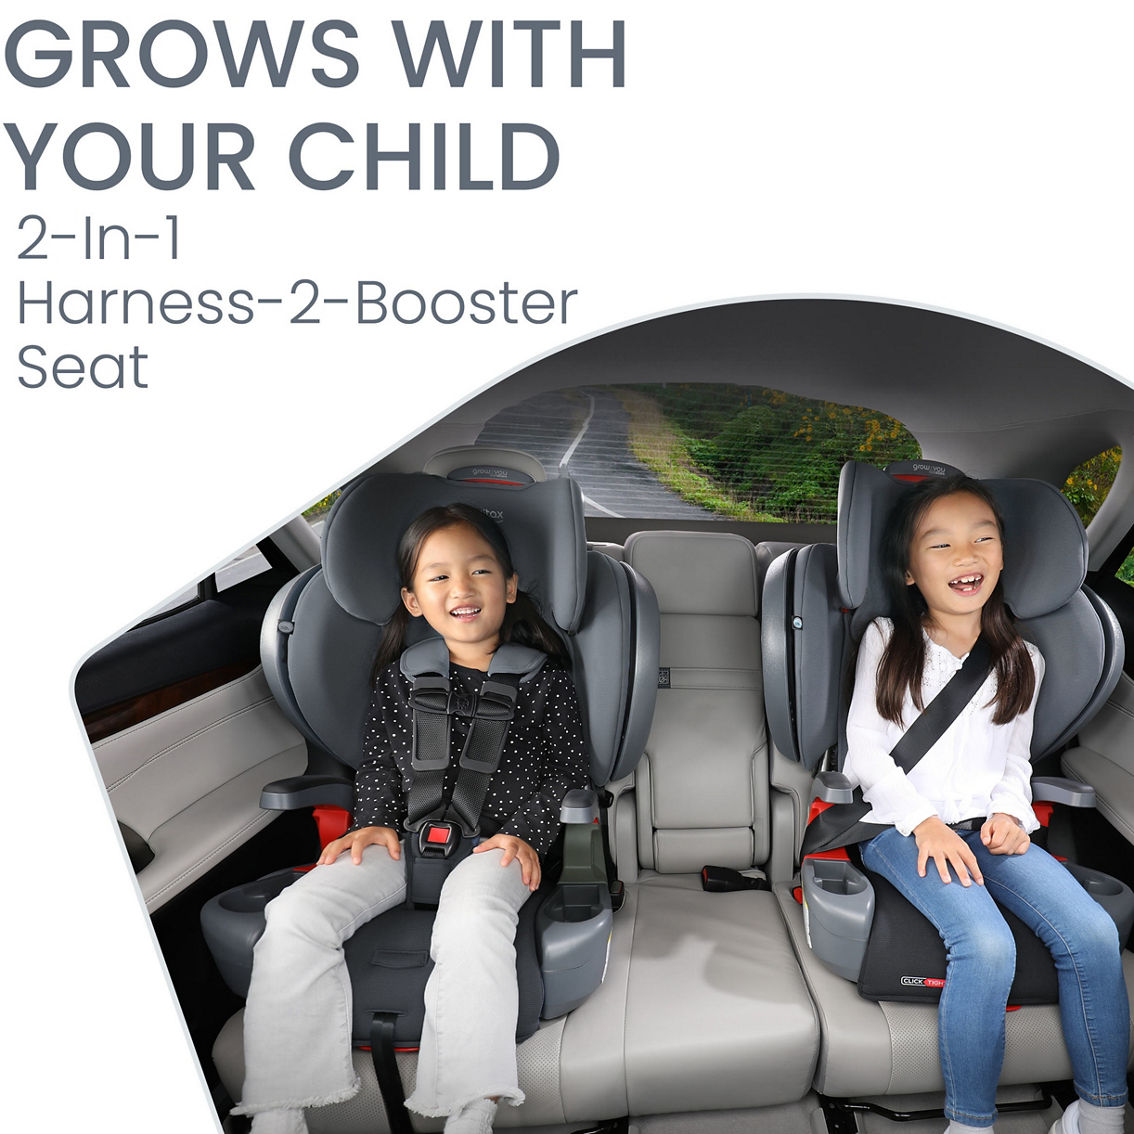 Britax Grow with You ClickTight+ Harness-2-Booster - Image 2 of 2